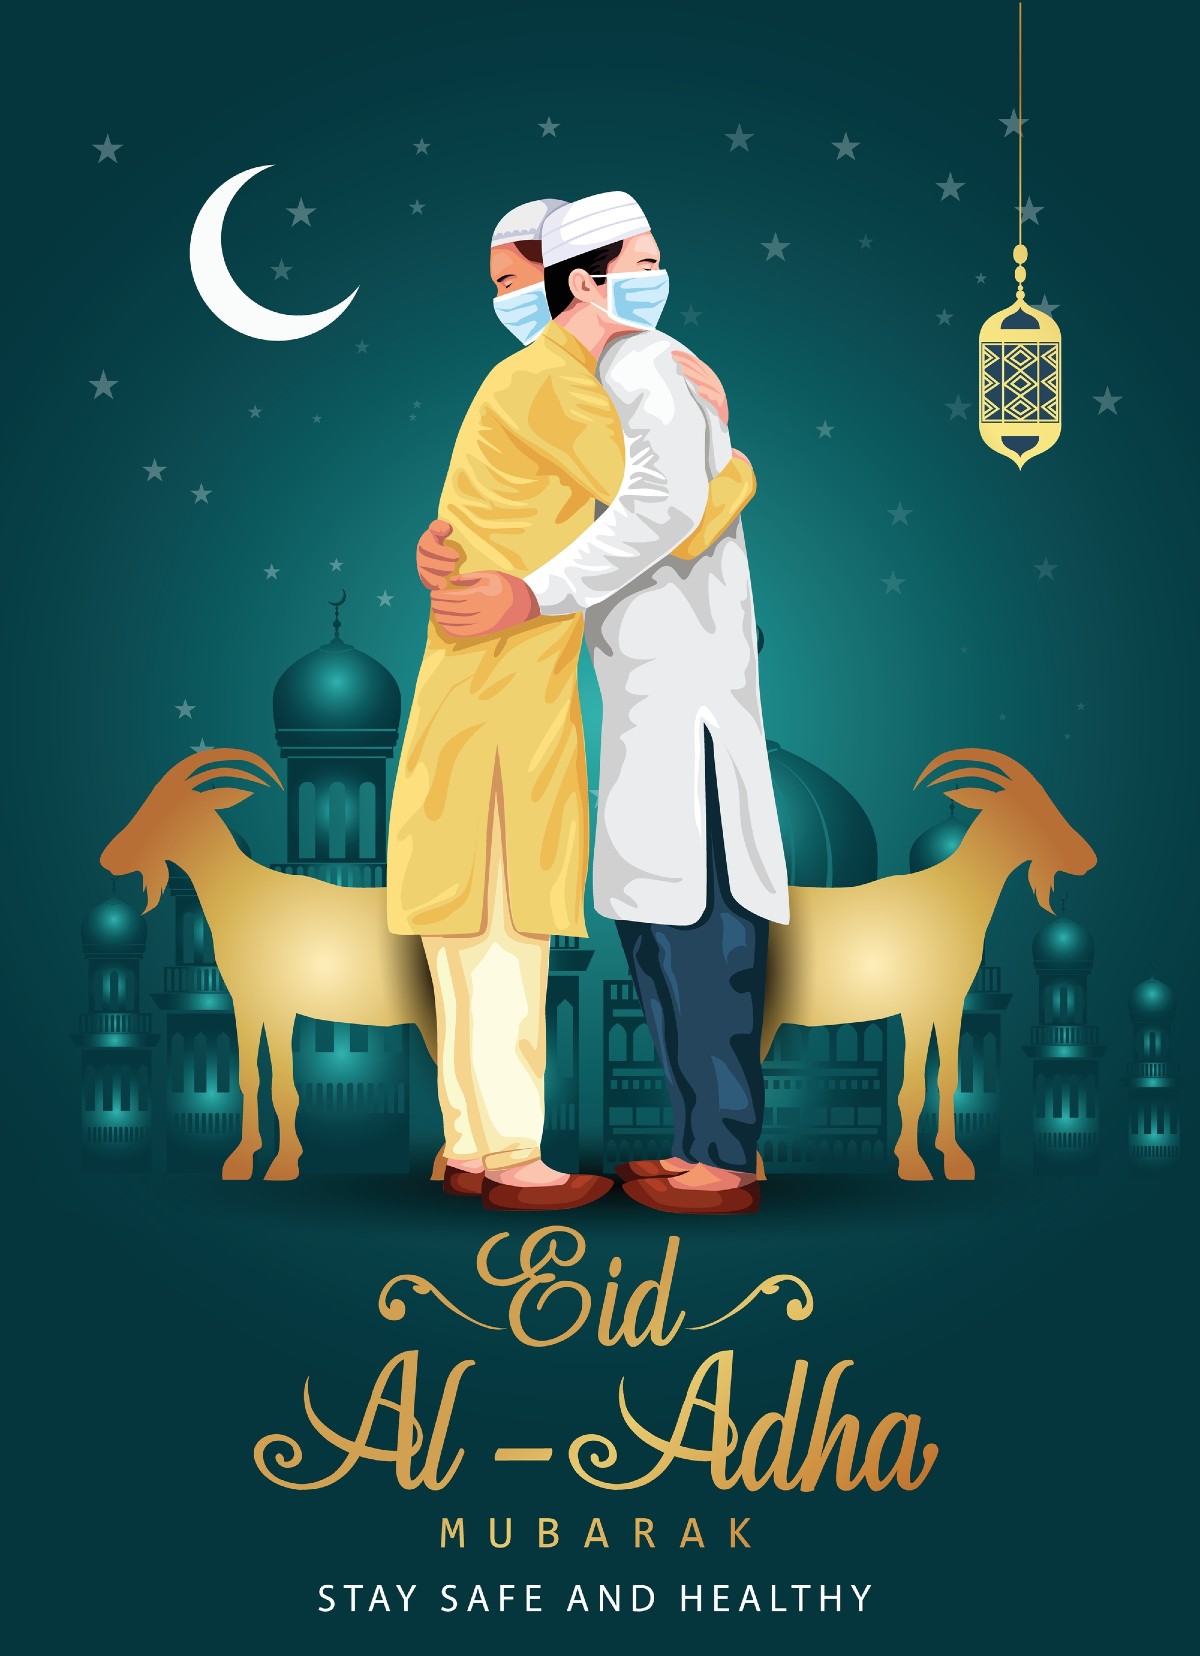 Bakrid Mubarak Images, Wishes, Quotes and Messages to Share Amid COVID